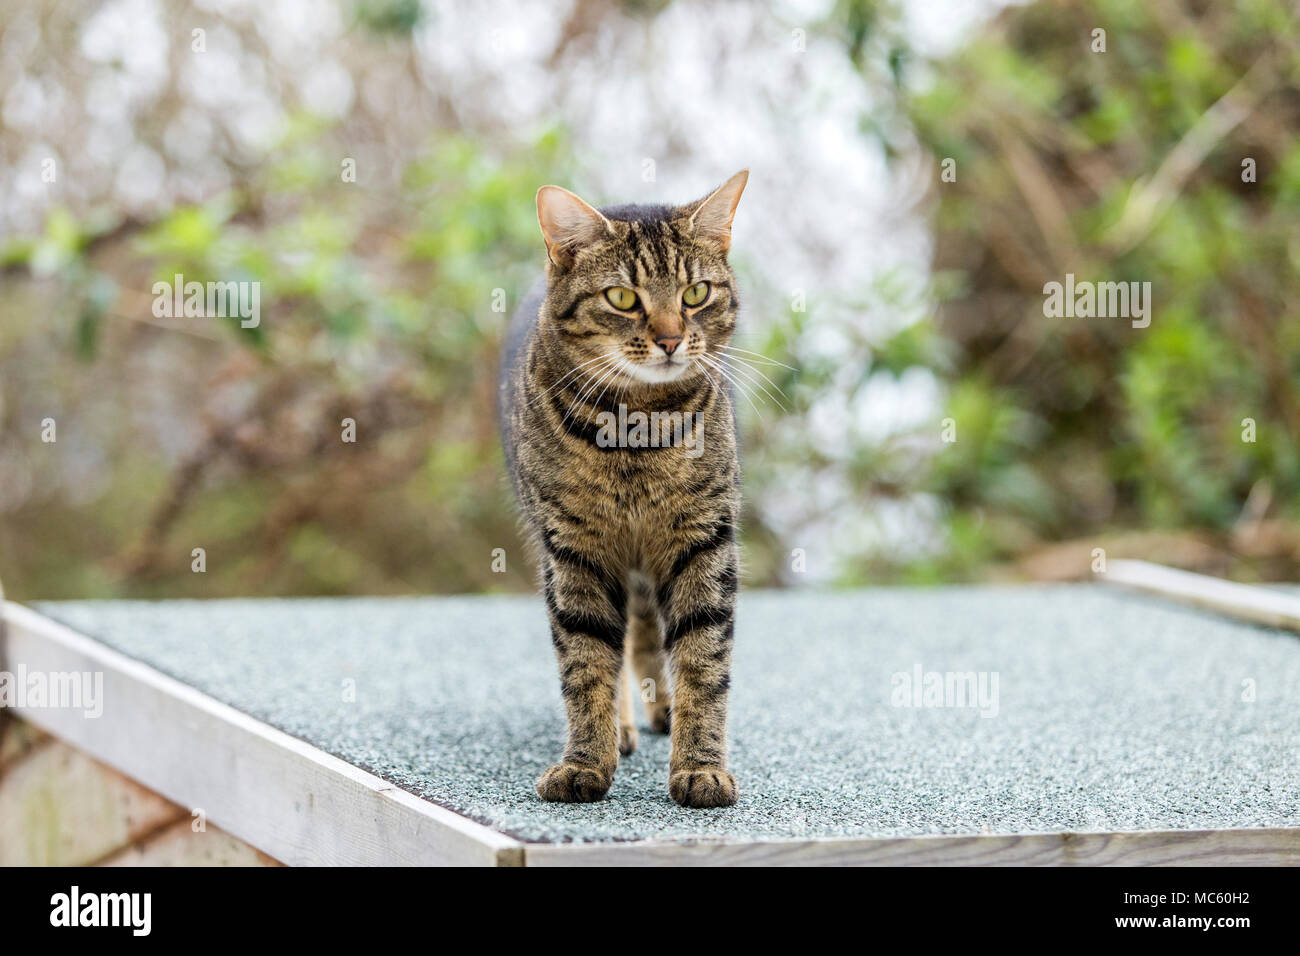 Young Tabby Cat Bengal Cat Climbing On Top Of A Shed Roof Stock Photo Alamy